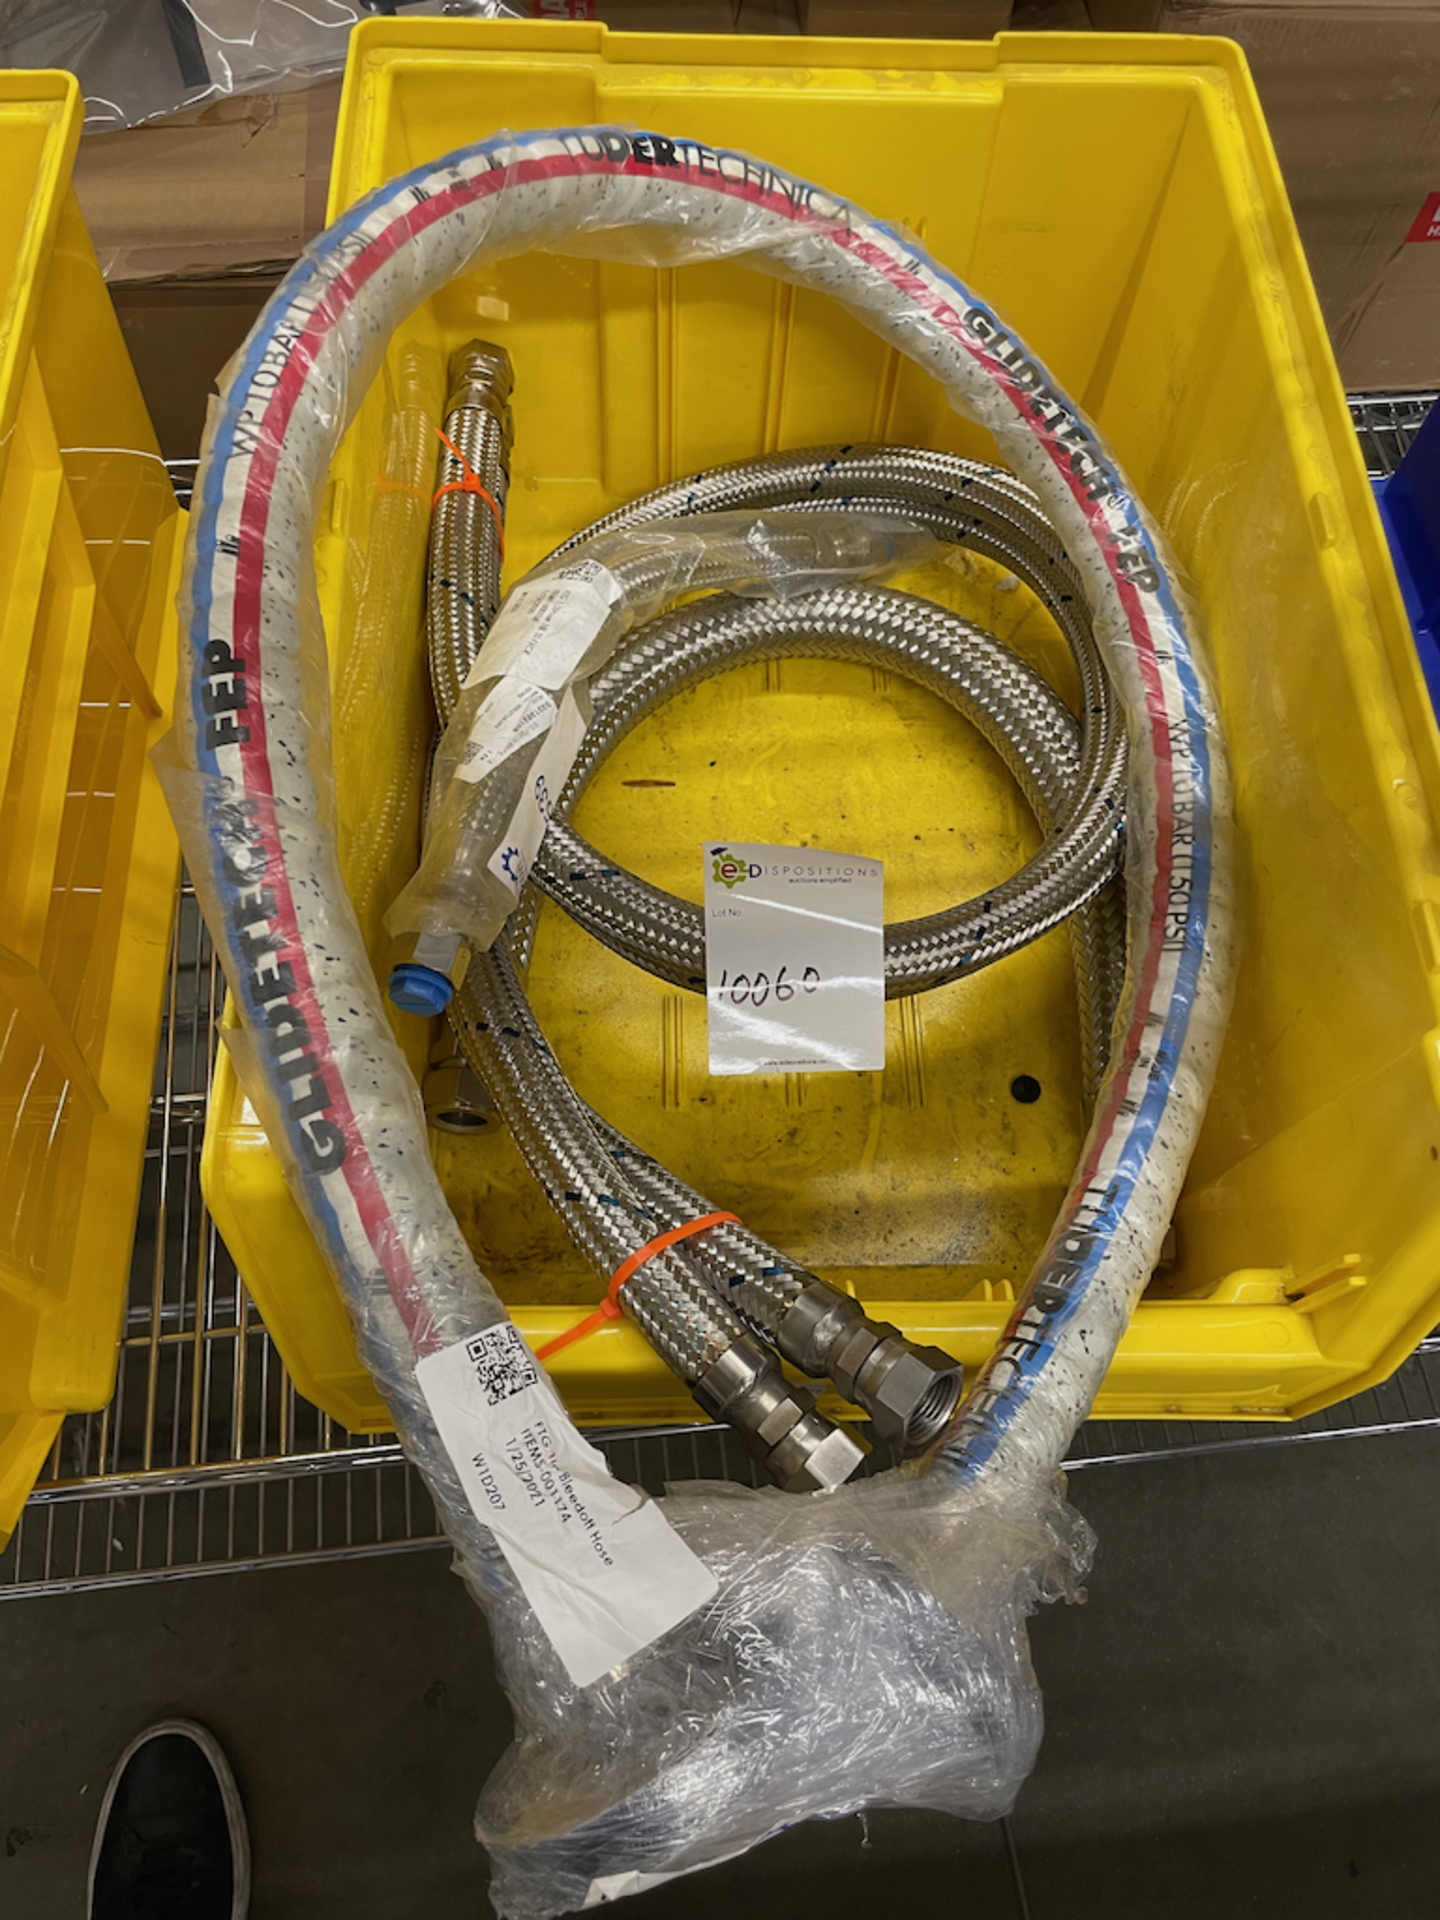 LOT CONSISTING OF QTY-4 SECTIONS OF BRAIDED WIRE TUBES | CABLES, 2 ~5' SECTIONS & 1- 2' SECTION - - Image 2 of 4